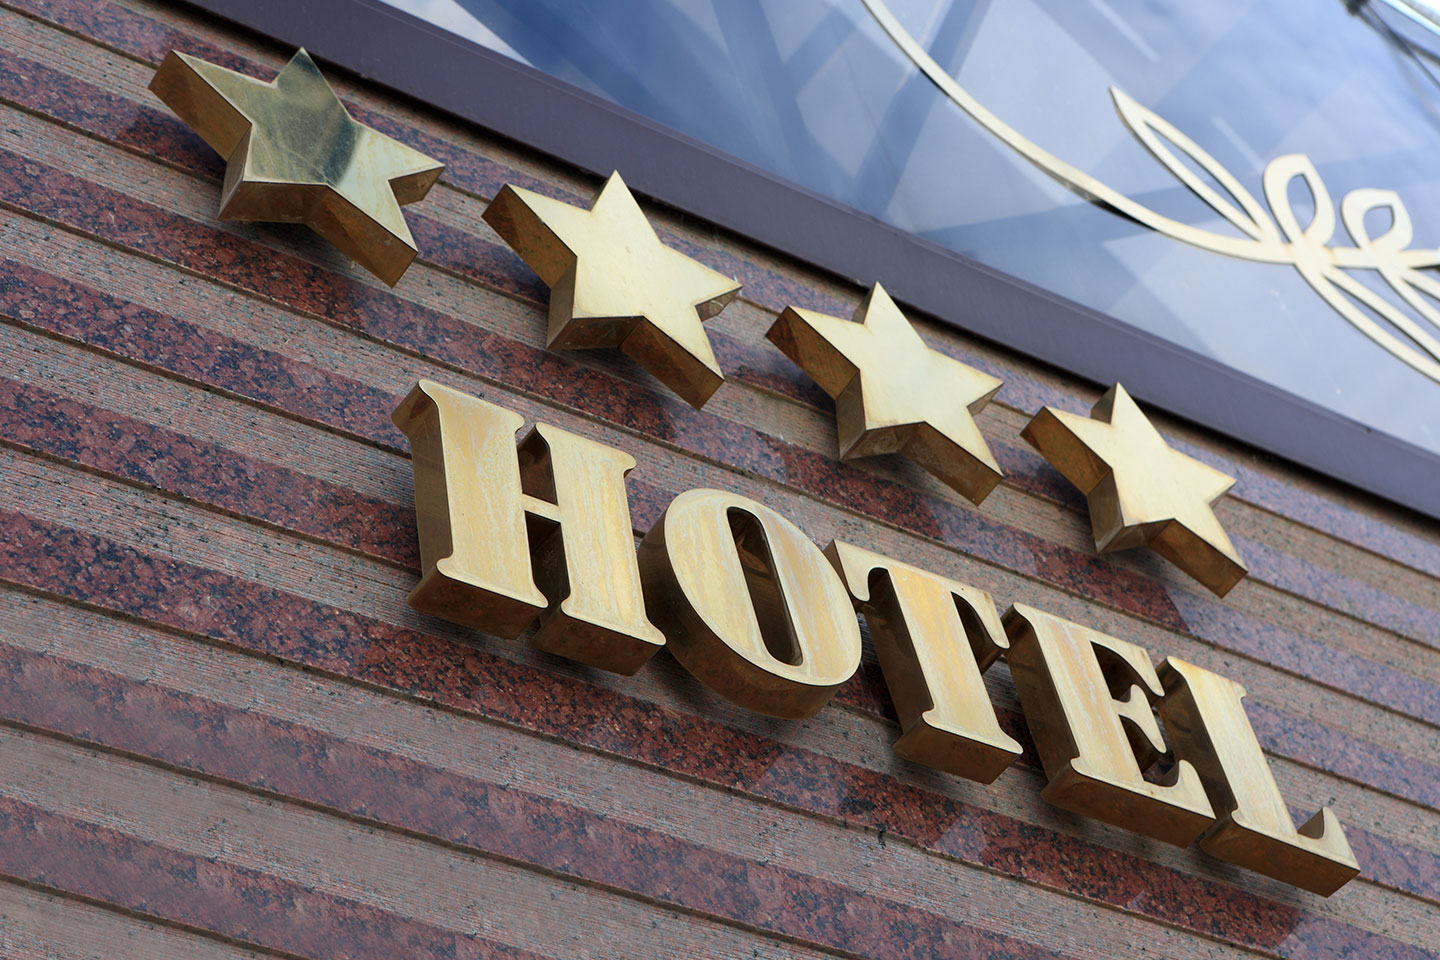 8 key terms every hospitality professional should know